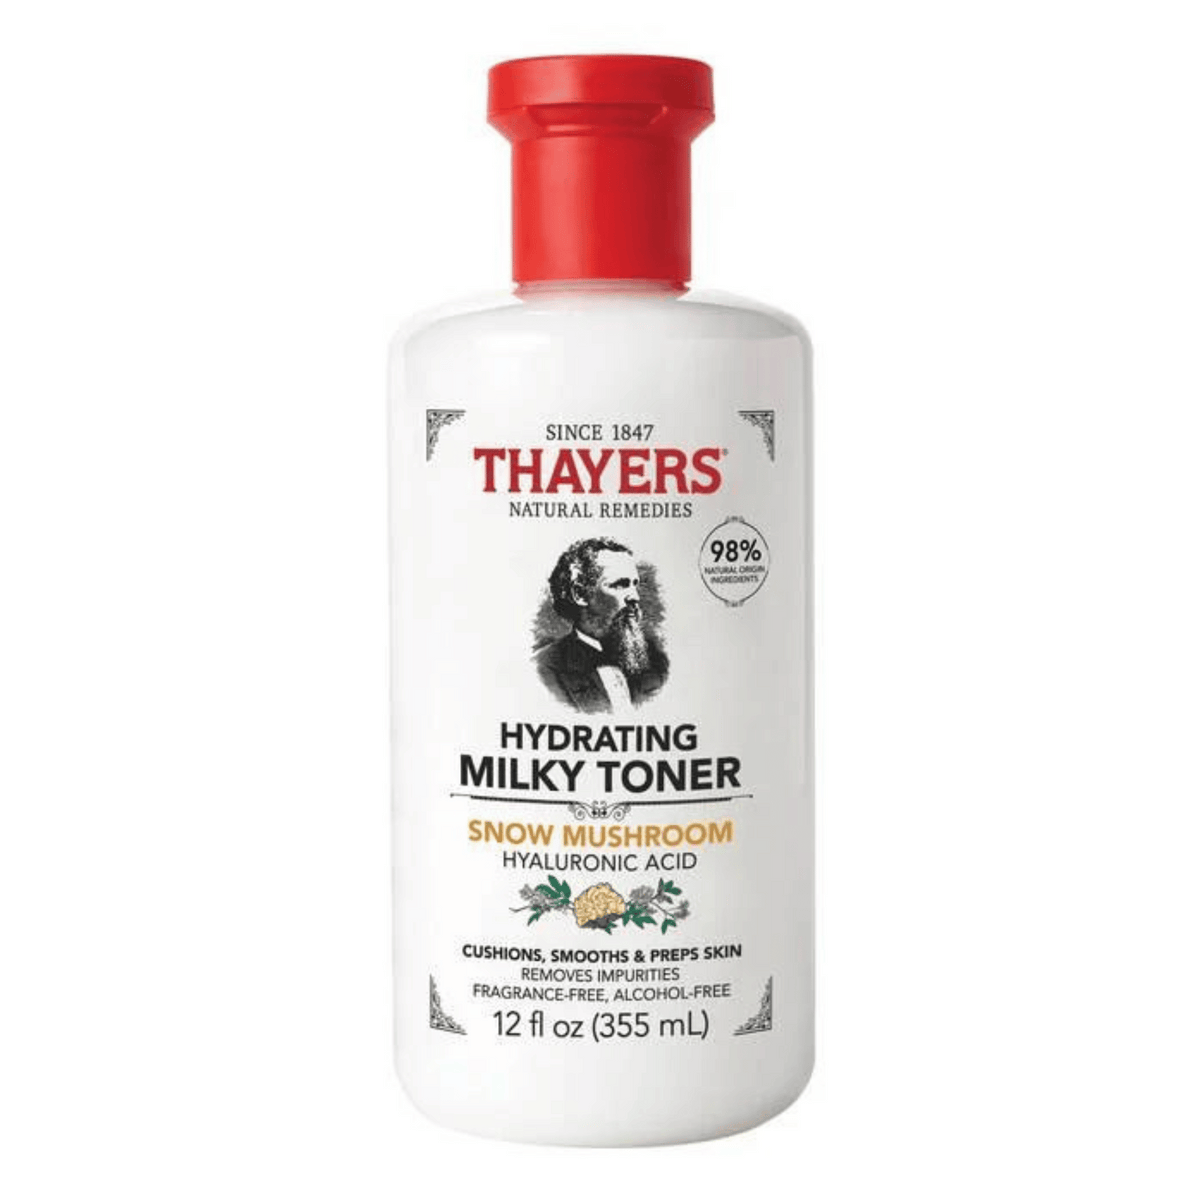 Primary Image of Hydrating Milky Toner